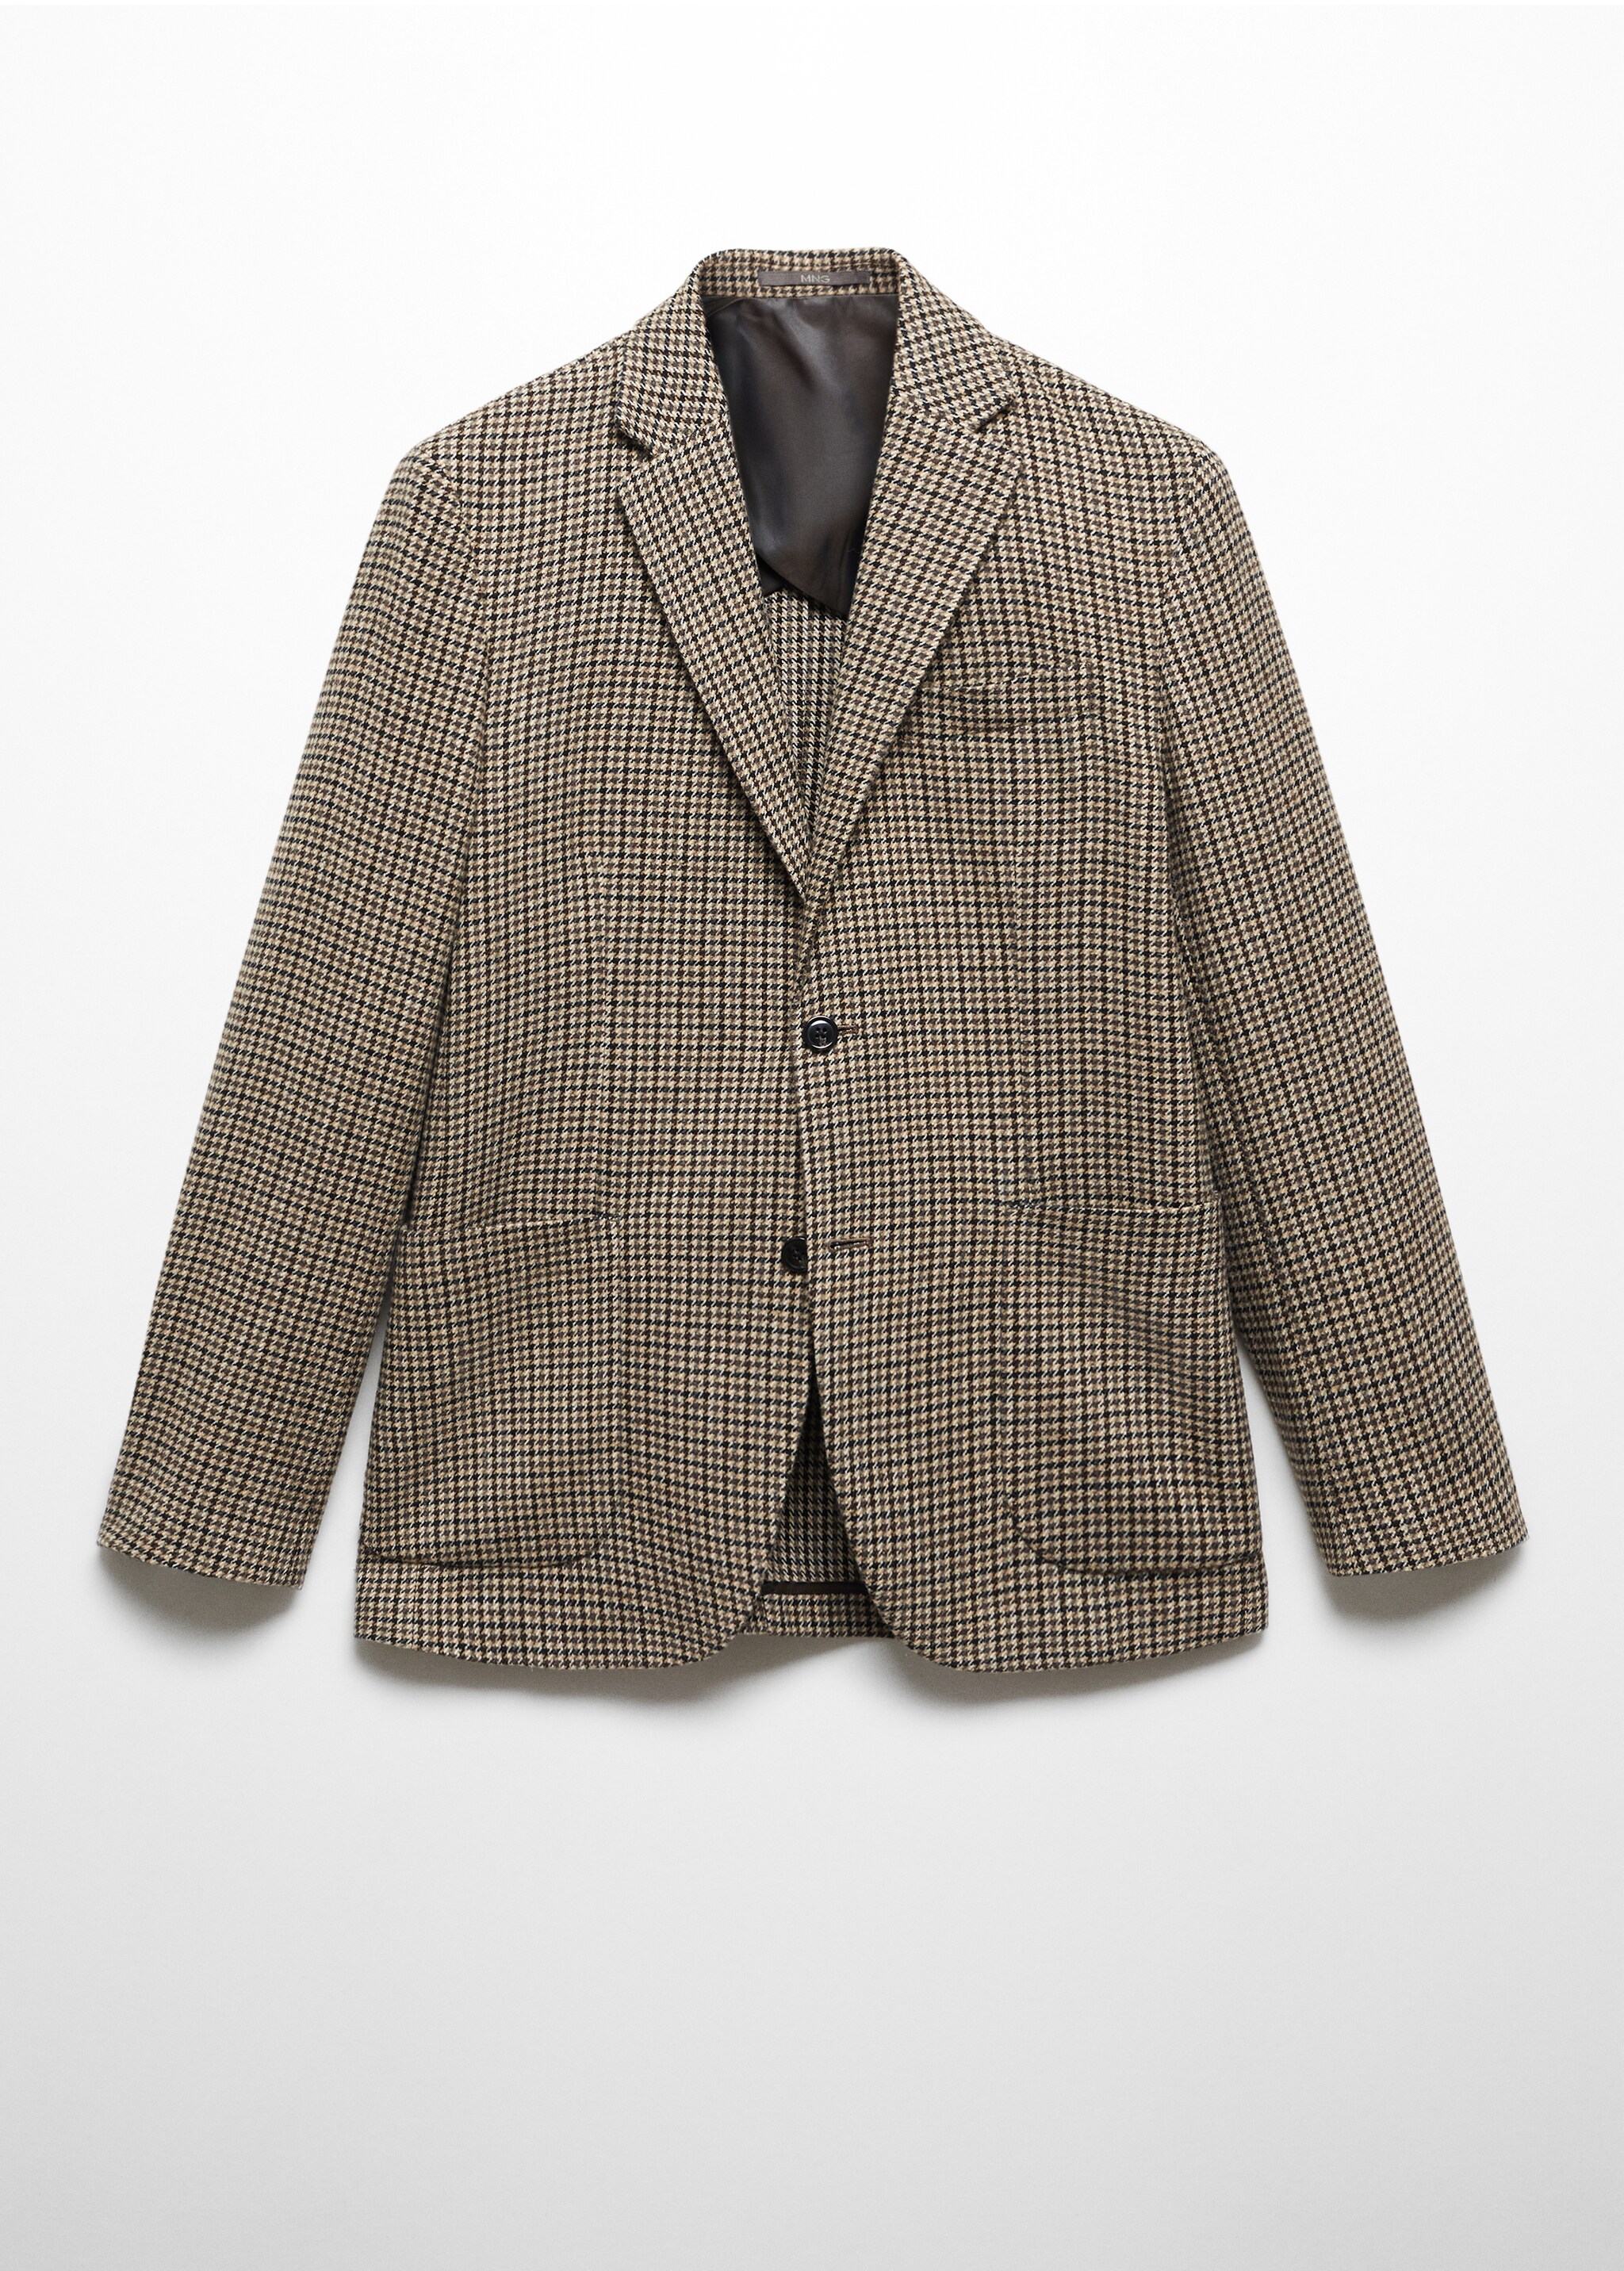 Wool slim-fit houndstooth jacket - Article without model